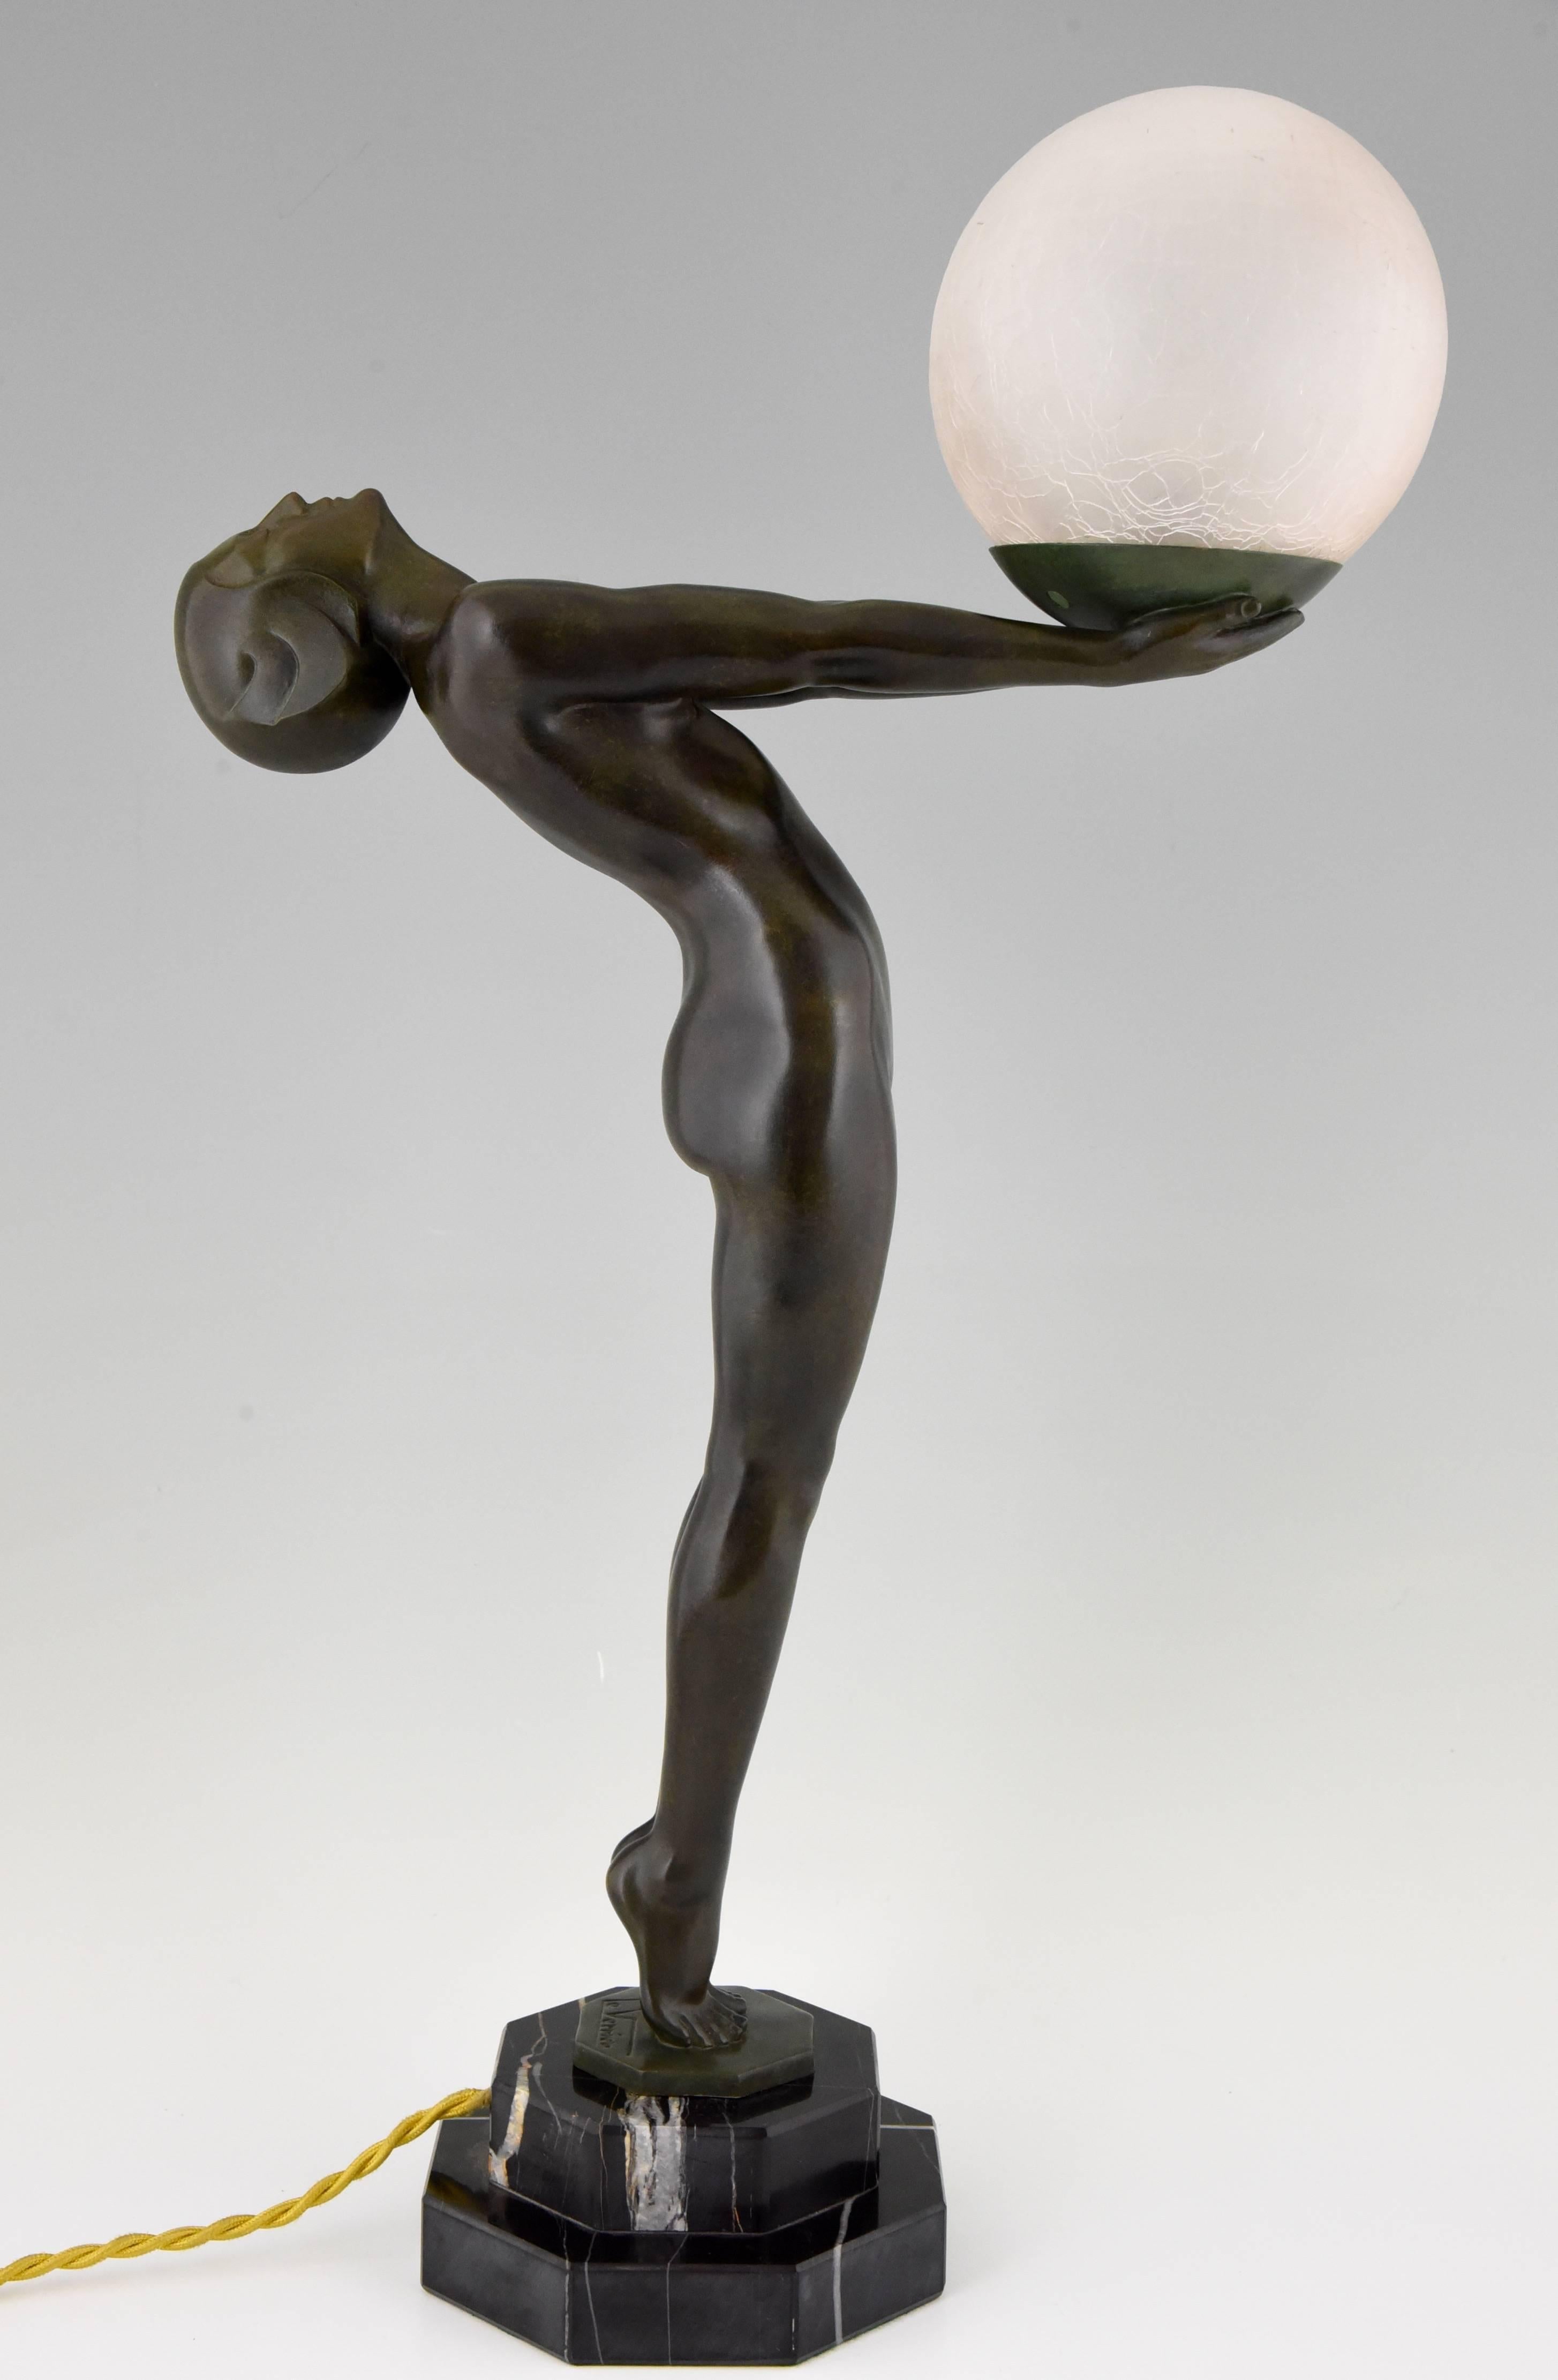 Patinated French Art Deco Lamp, Nude with Ball by Max Le Verrier, 1930